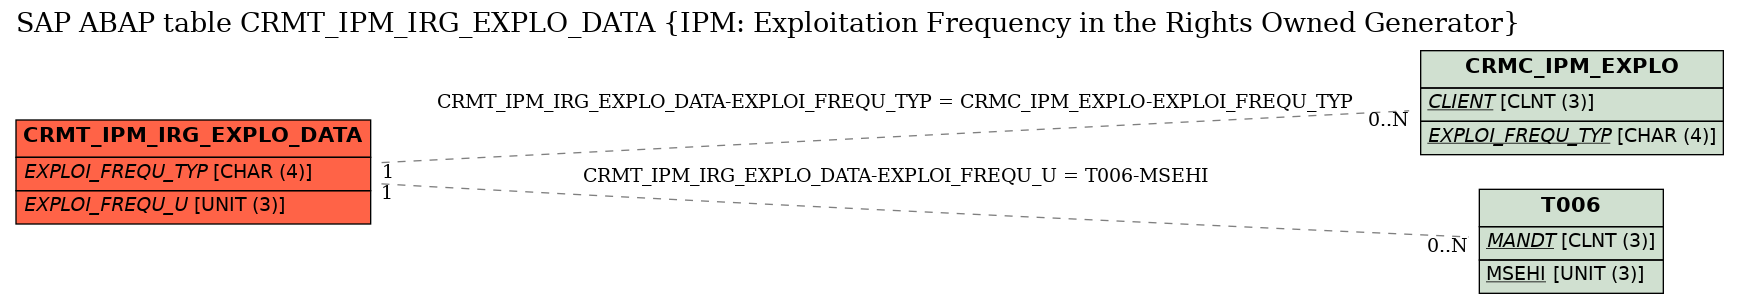 E-R Diagram for table CRMT_IPM_IRG_EXPLO_DATA (IPM: Exploitation Frequency in the Rights Owned Generator)